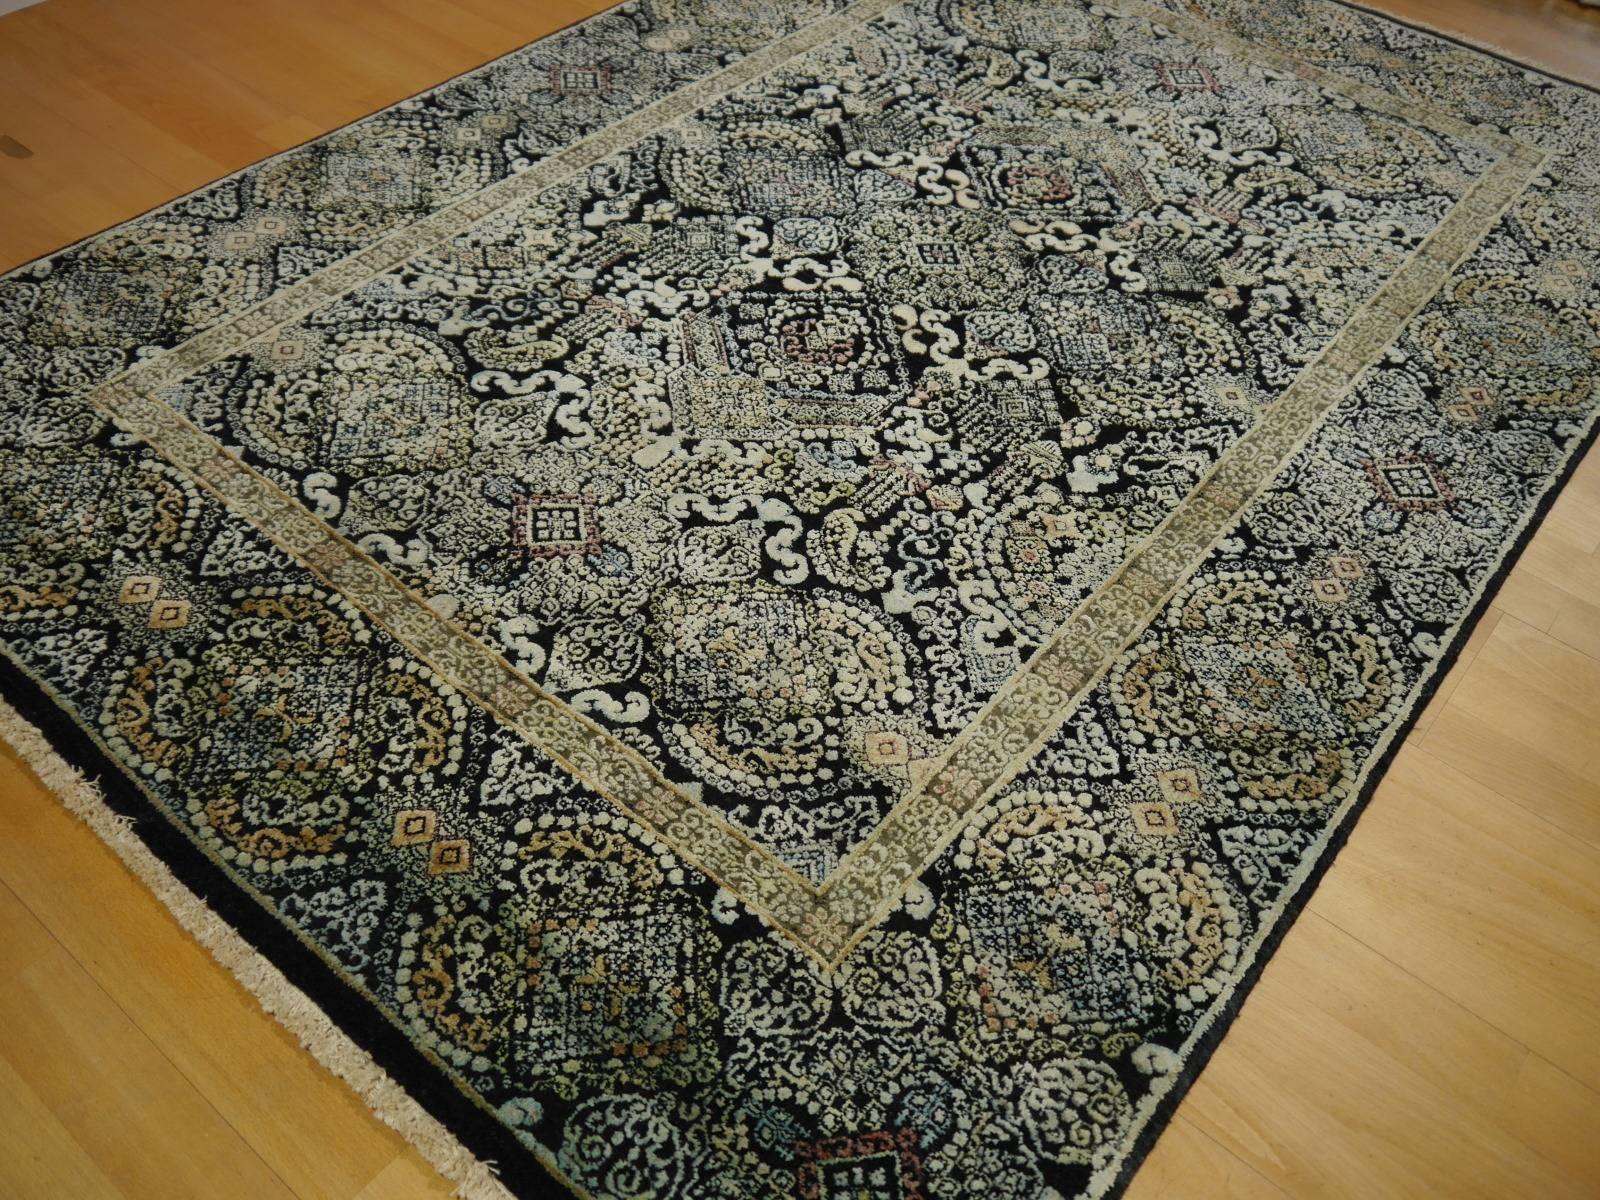 Kohinoor Hand-Knotted Wool and Silk Rug from India Black Gold Green  (Handgeknüpft)